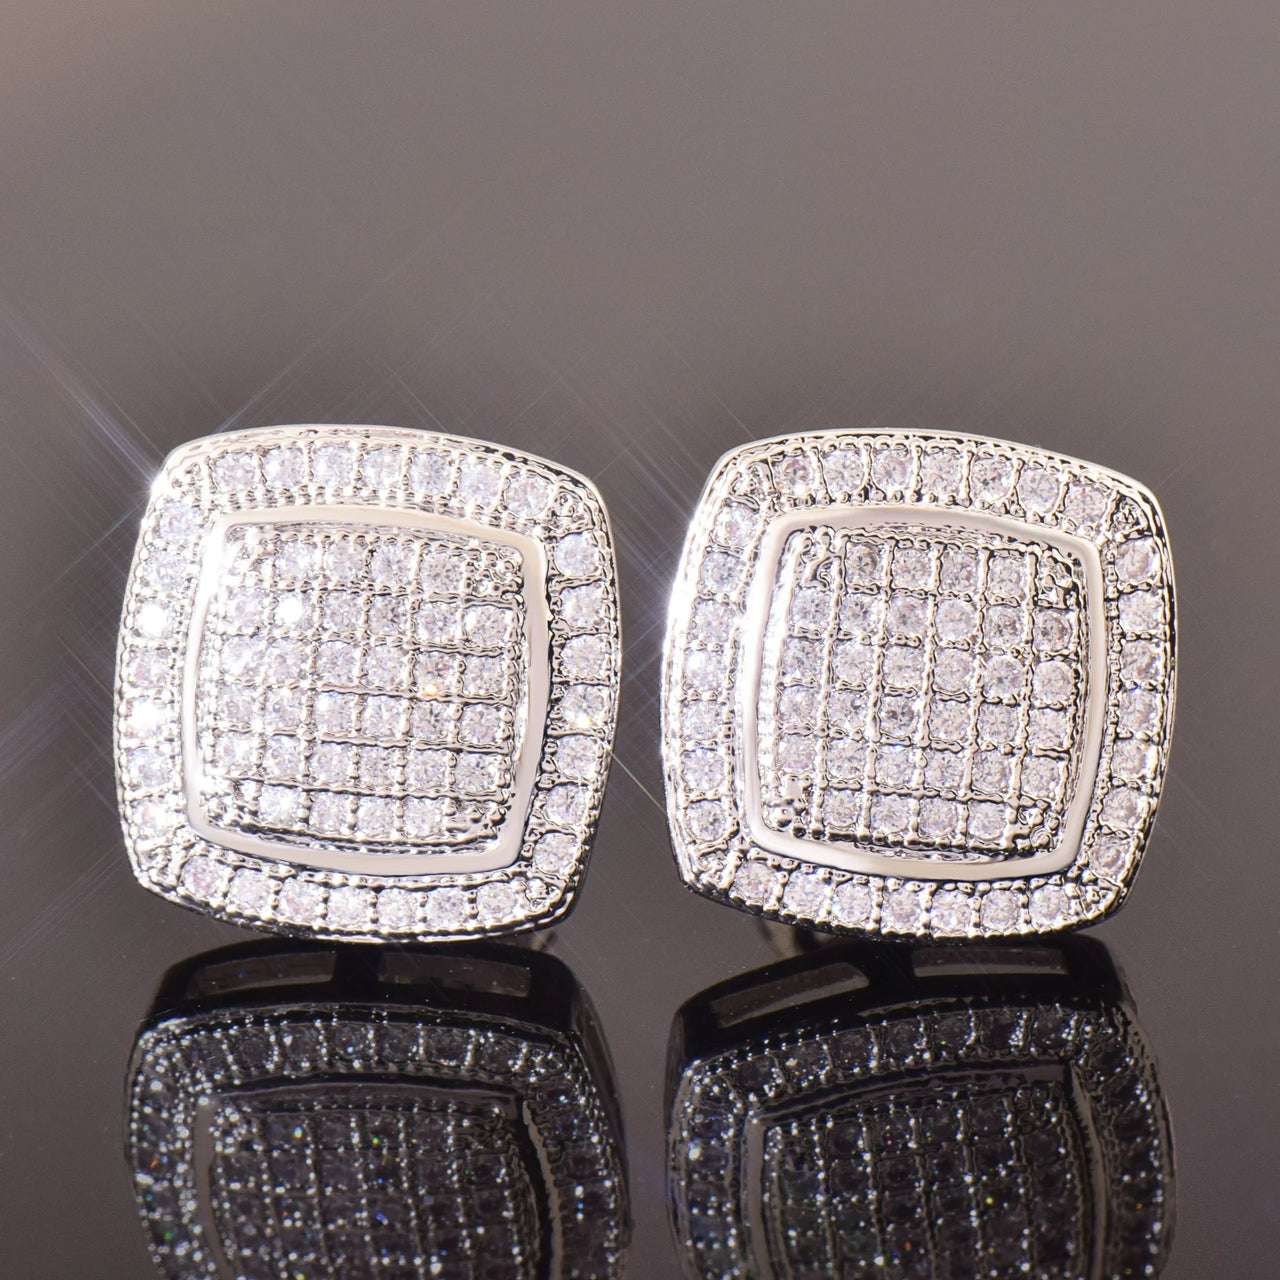 12mm Raised Square Cut Earrings - Different Drips